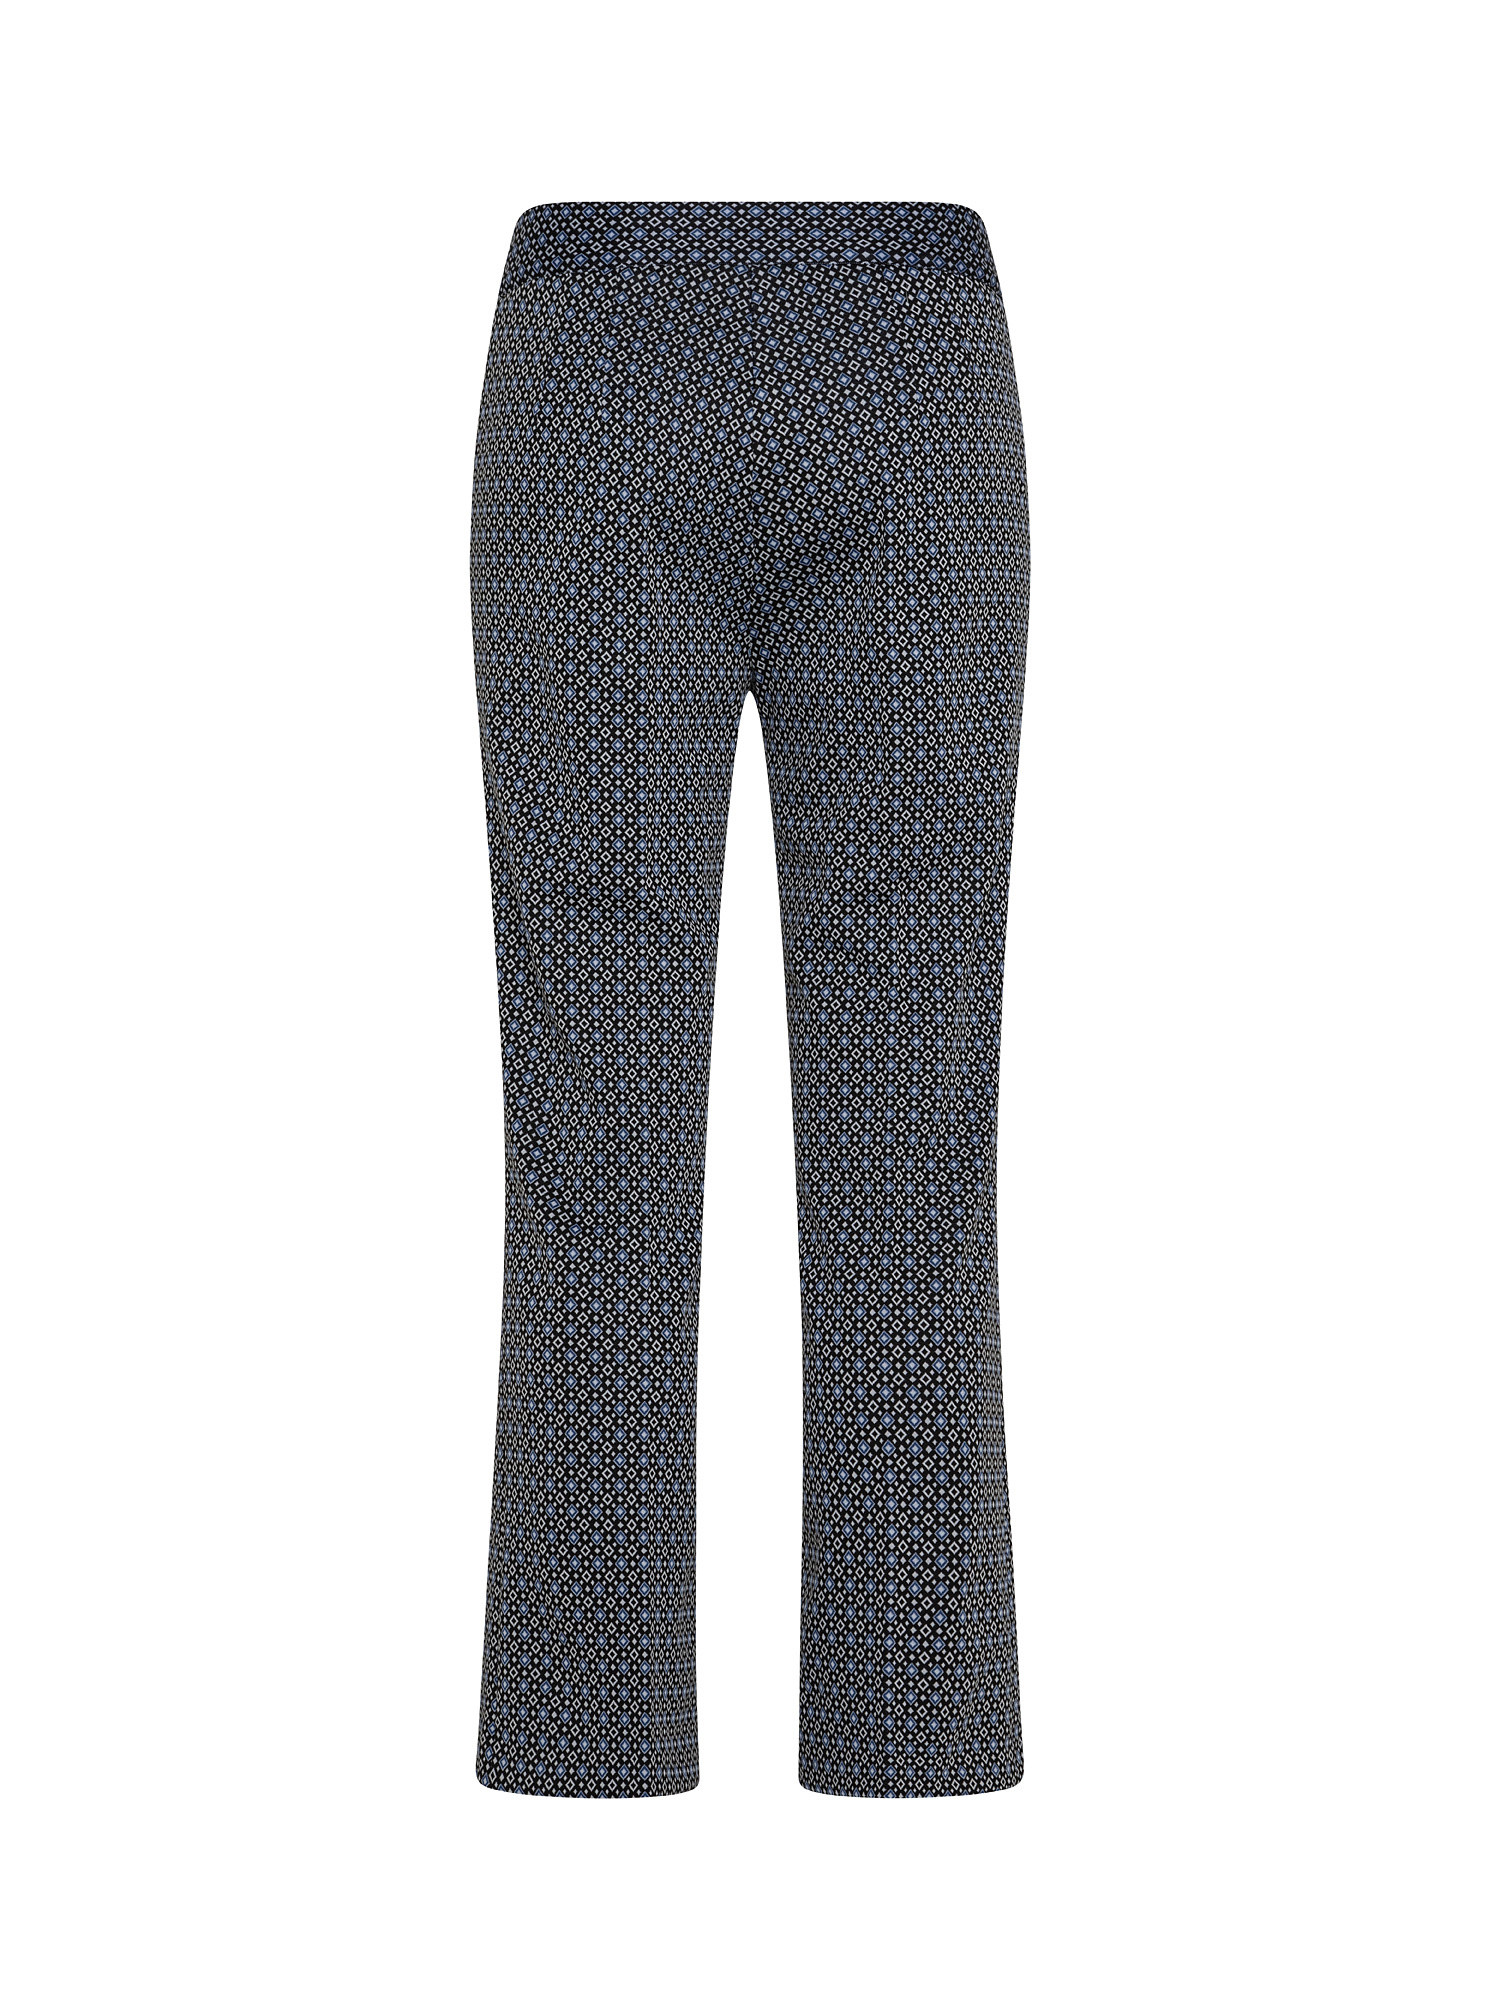 Trousers with pattern, Blue, large image number 1